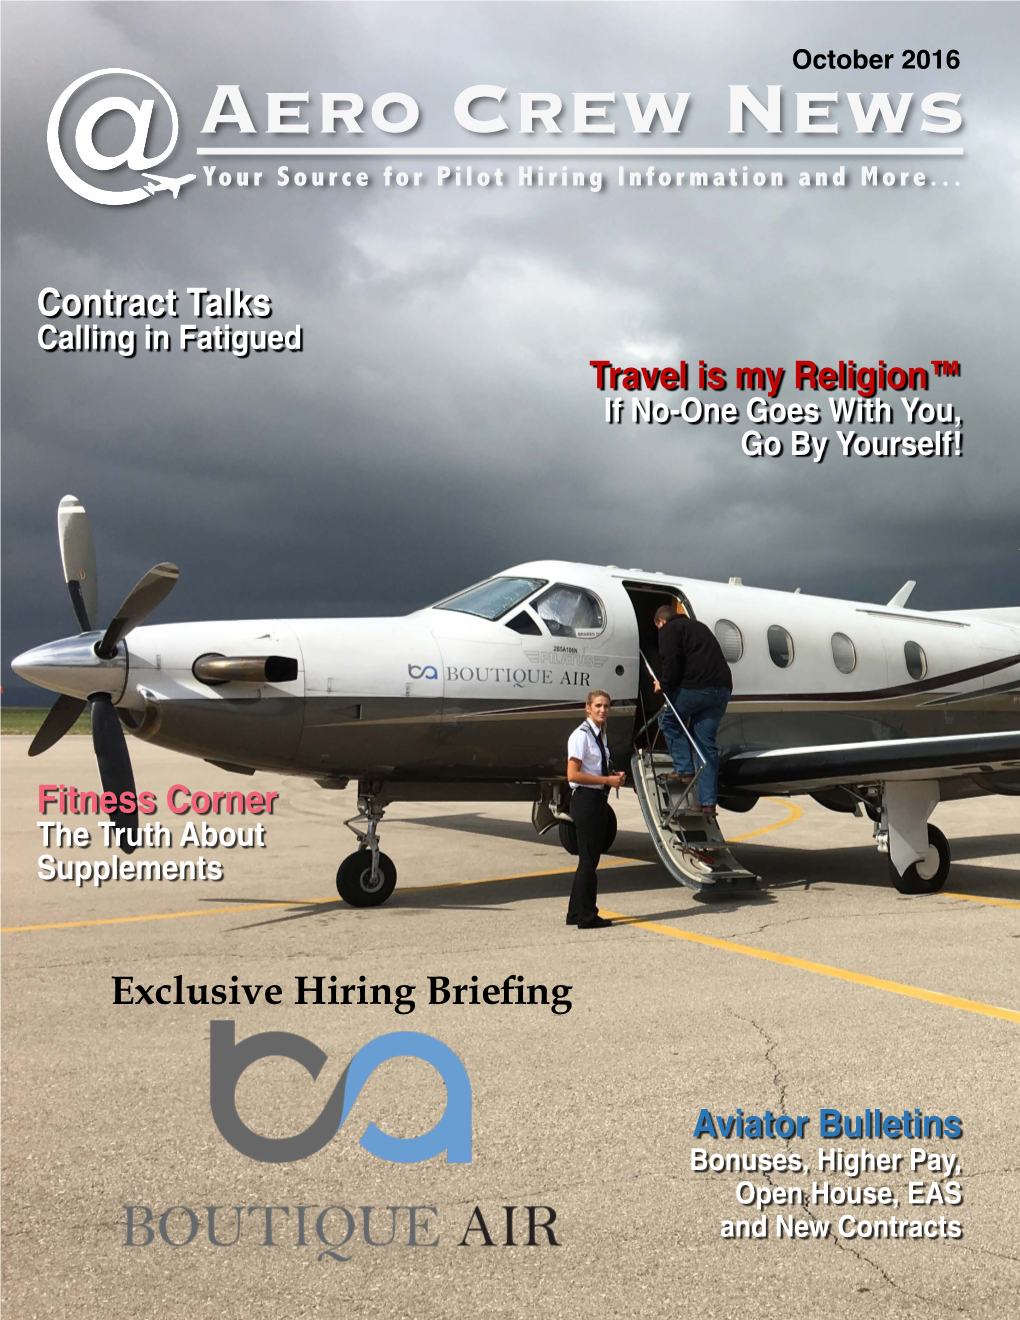 October 2016 Aero Crew News Your Source for Pilot Hiring Information and More